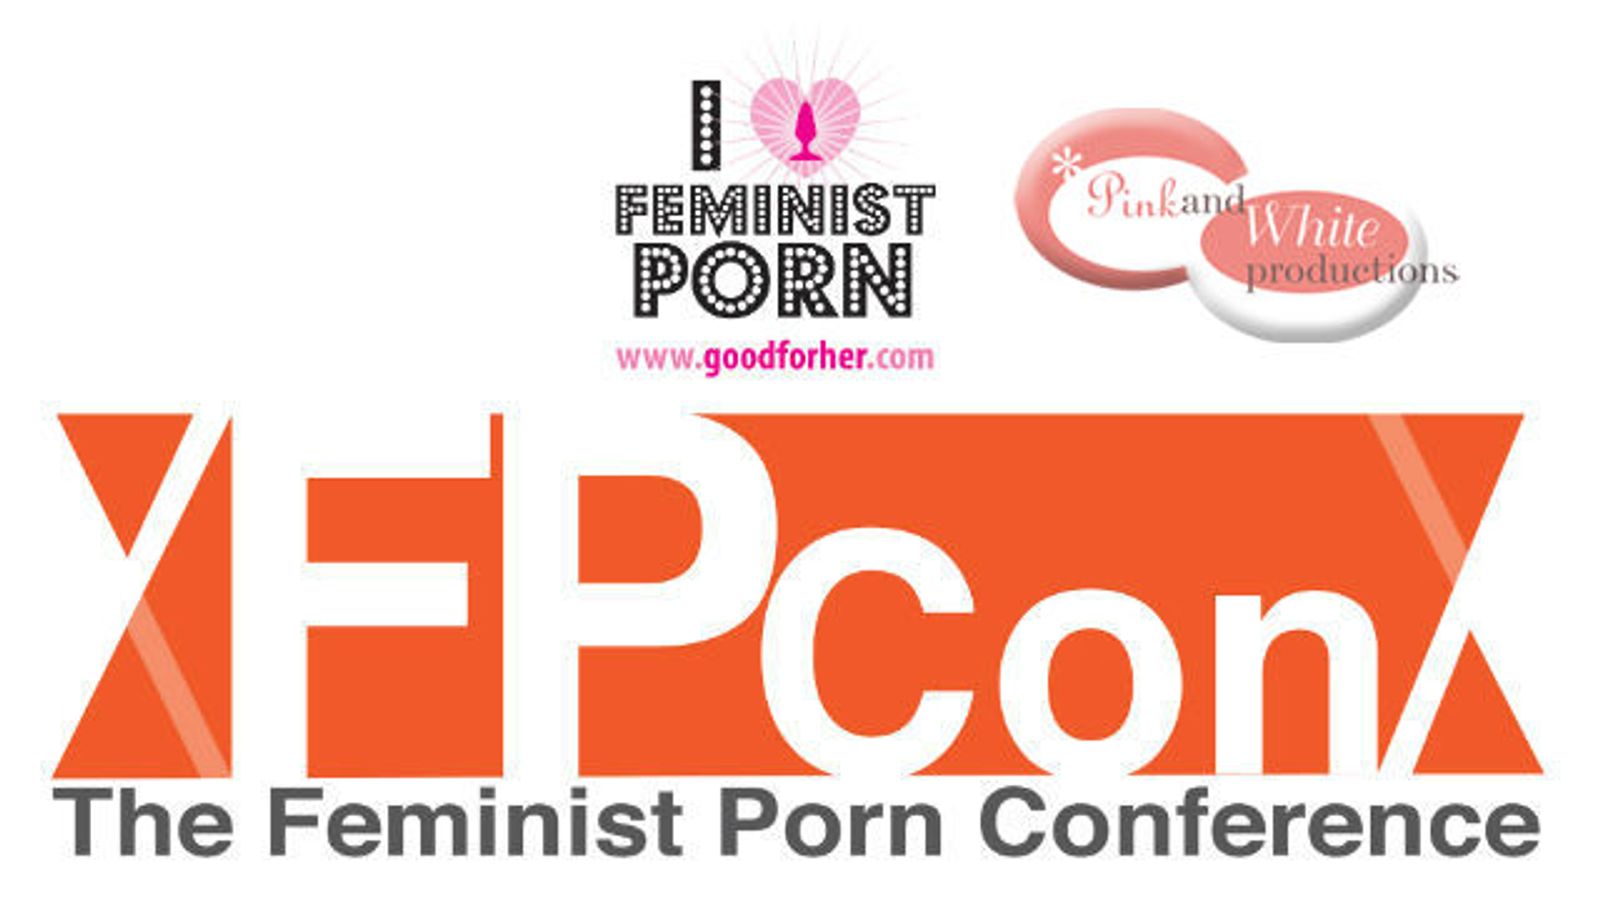 Pink & White Presents at Feminist Porn Conference in April